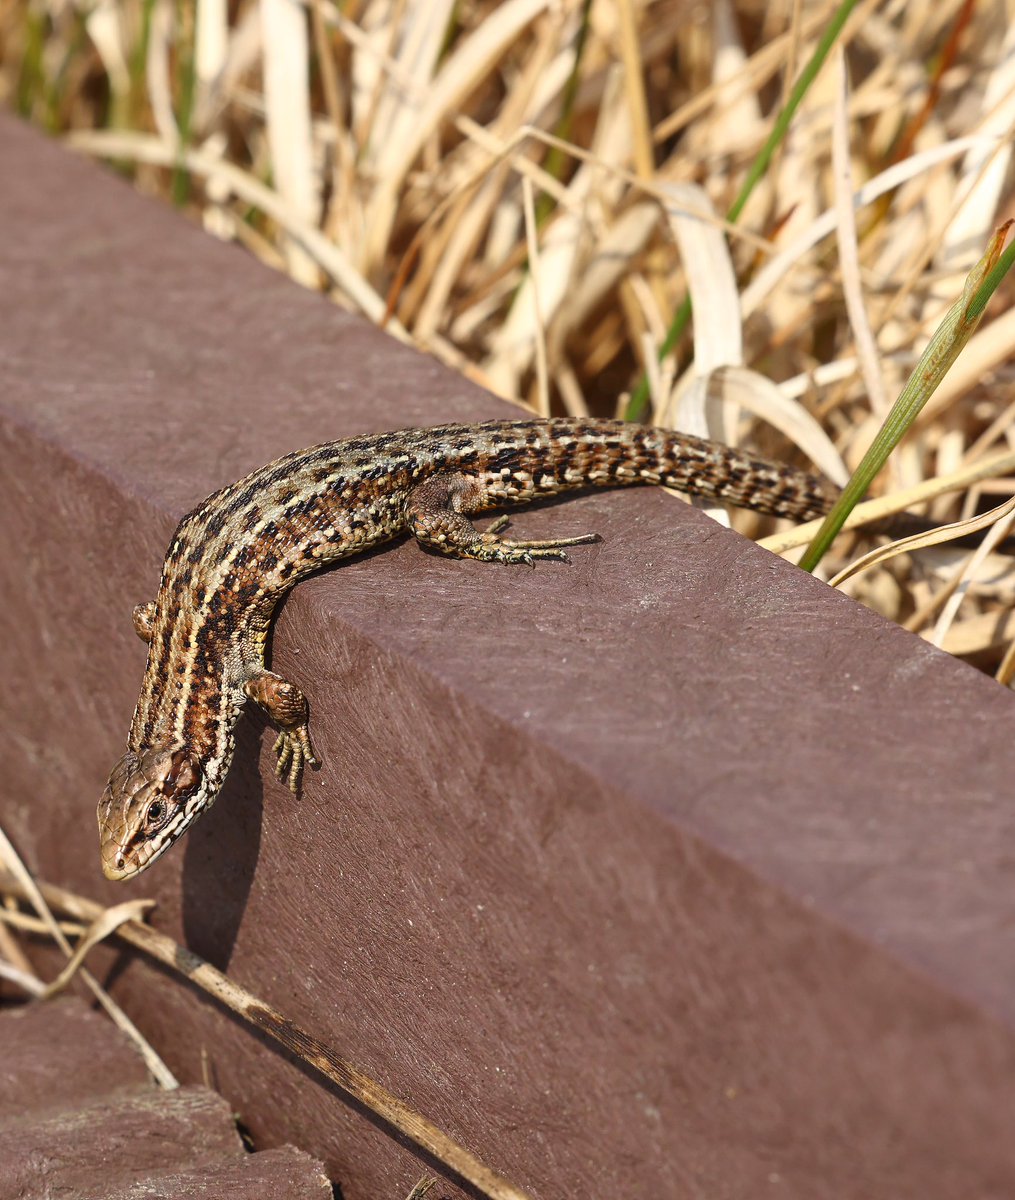 Warm and sunny last night, so went a wander around @NatureScot Flanders Moss. Lots of common lizards sunning themselves. #lizard #commonlizard #flandersmoss #nature #wildlife #wildlifephotography #naturephotography #naturephotographer #wildlifephotographer